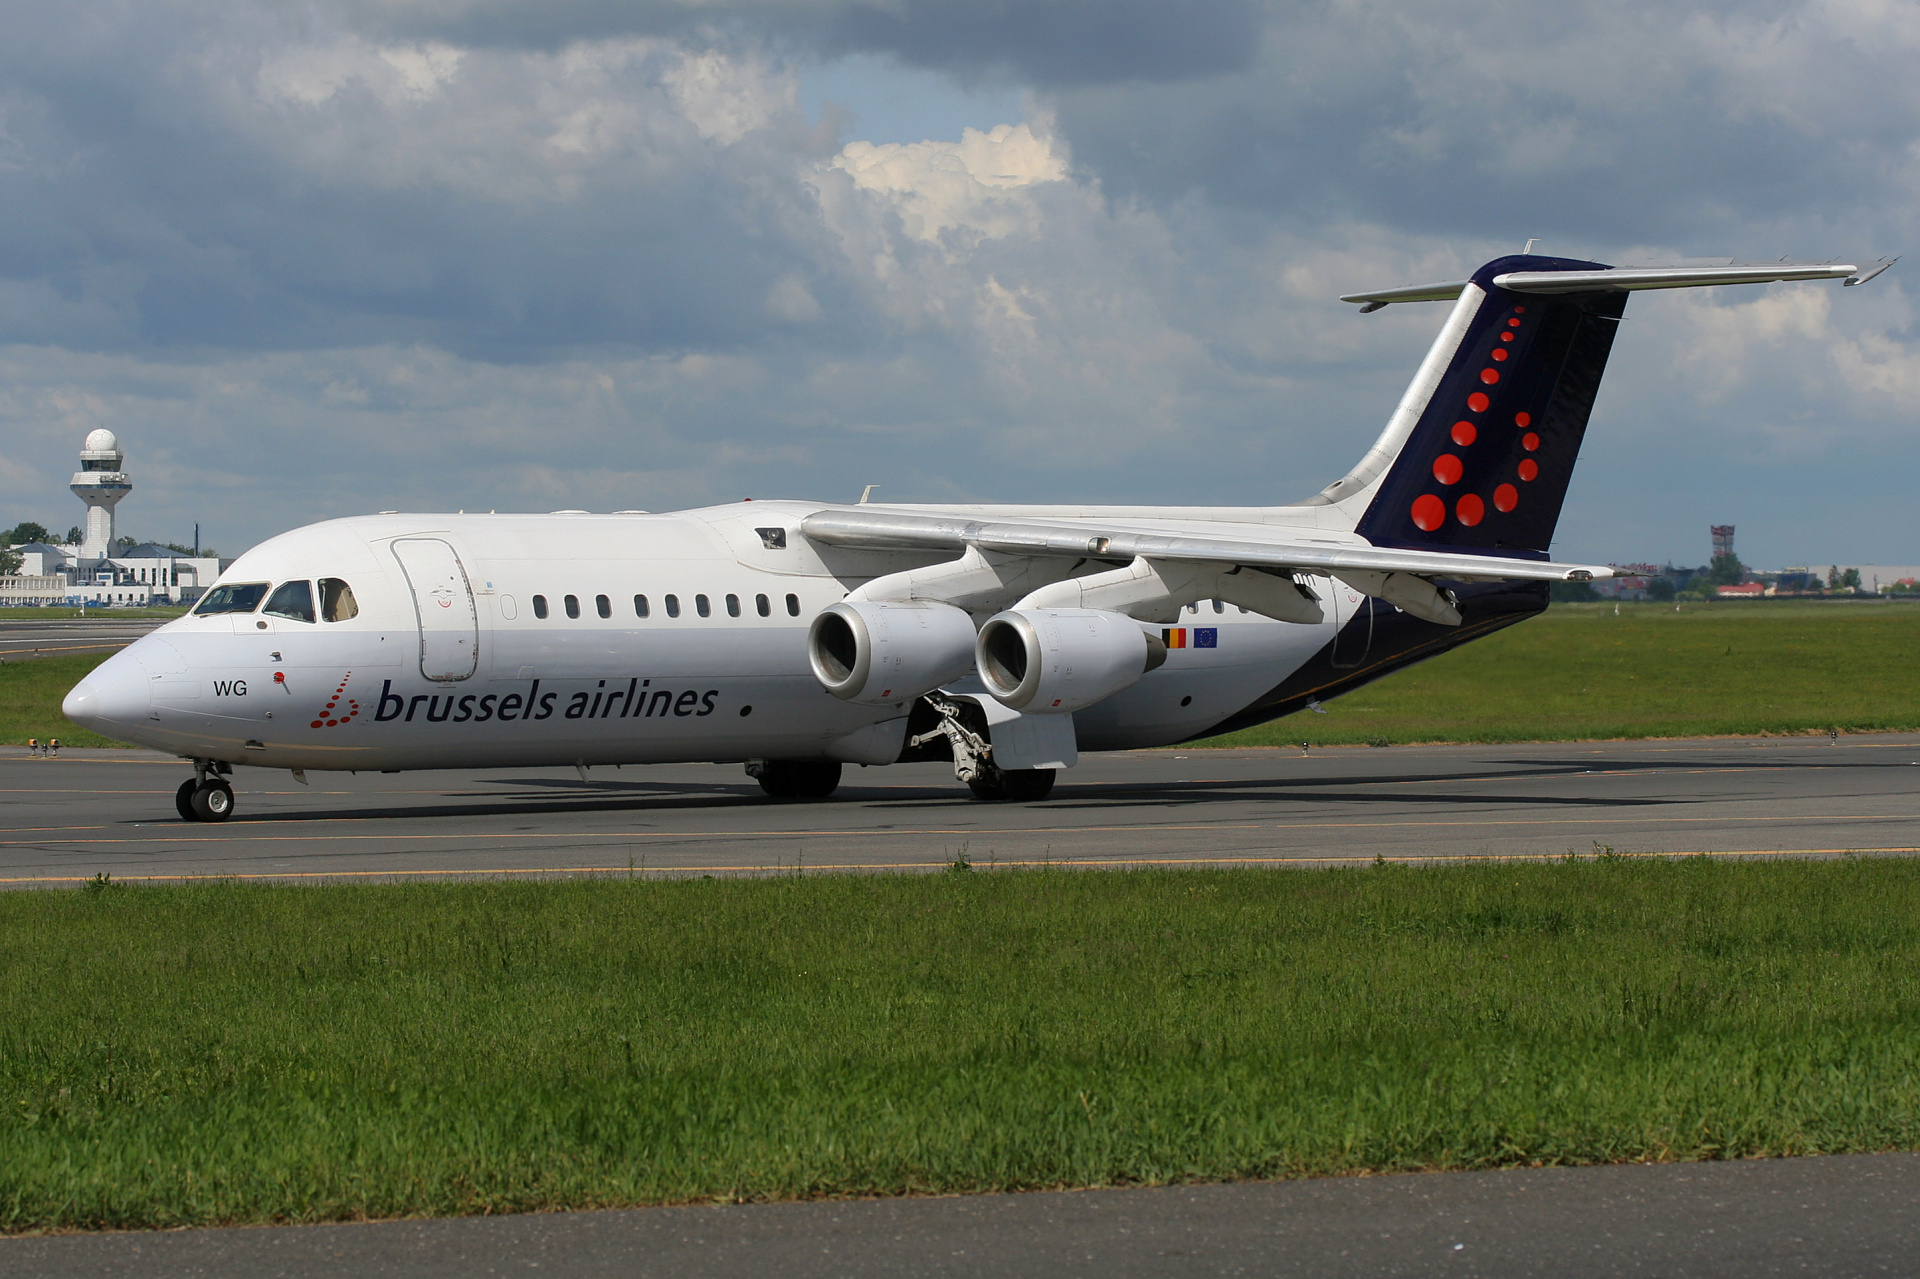 OO-DWG (Aircraft » EPWA Spotting » BAe 146 and revisions » Avro RJ100 » Brussels Airlines)